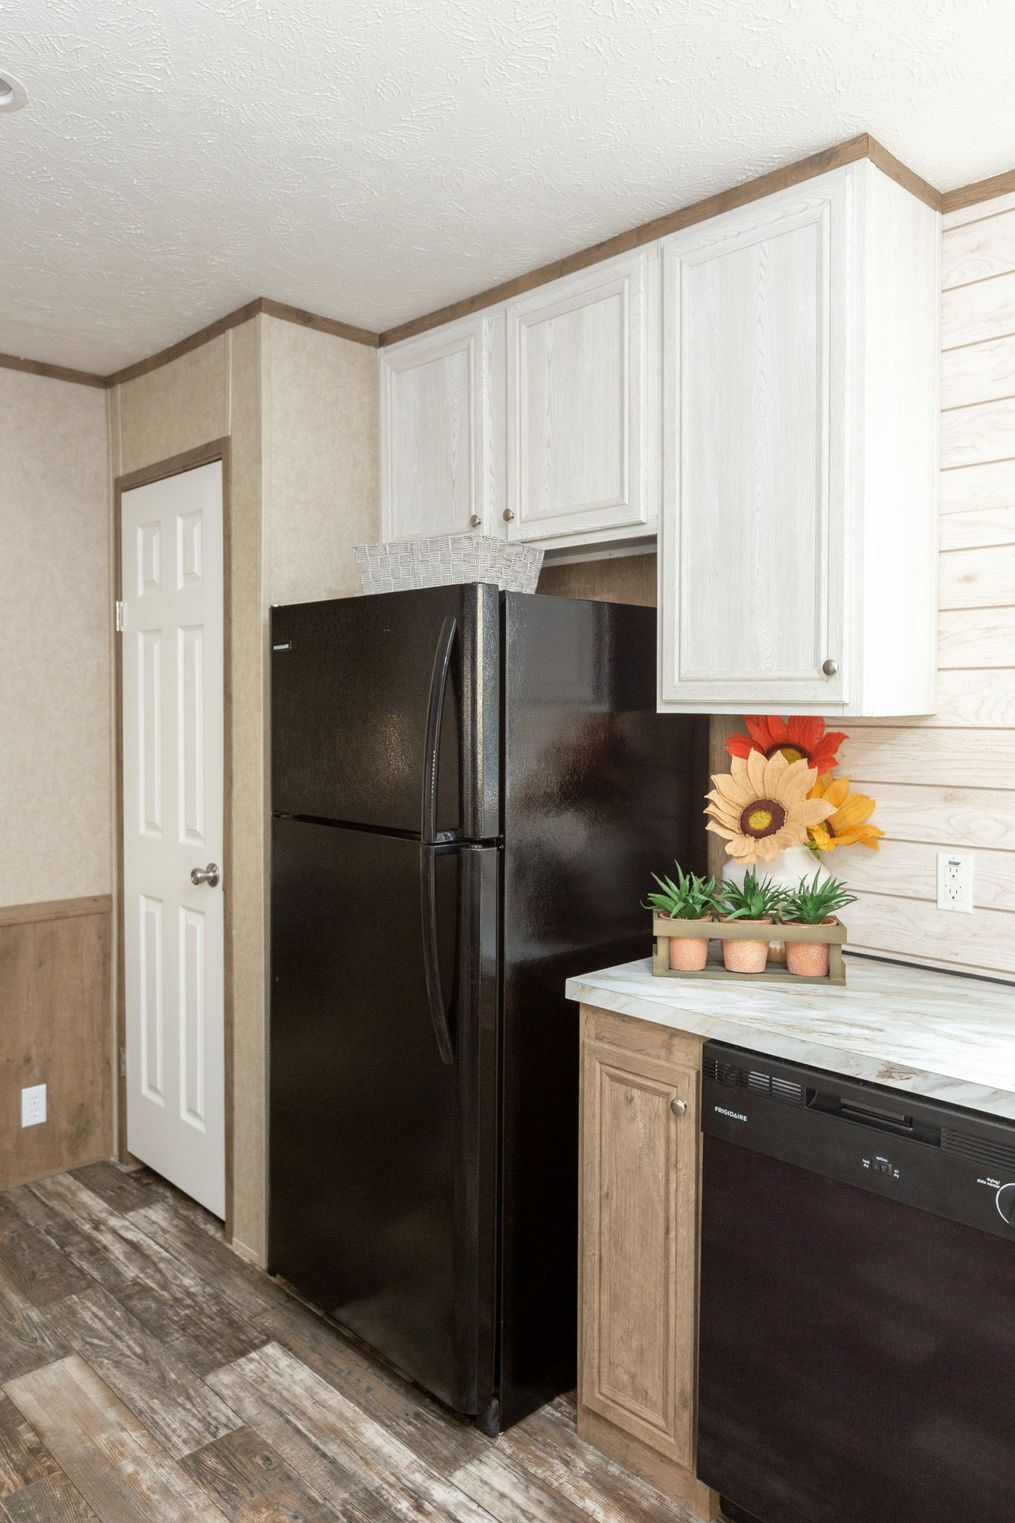 The THE RANCH HOUSE Kitchen. This Manufactured Mobile Home features 3 bedrooms and 2 baths.